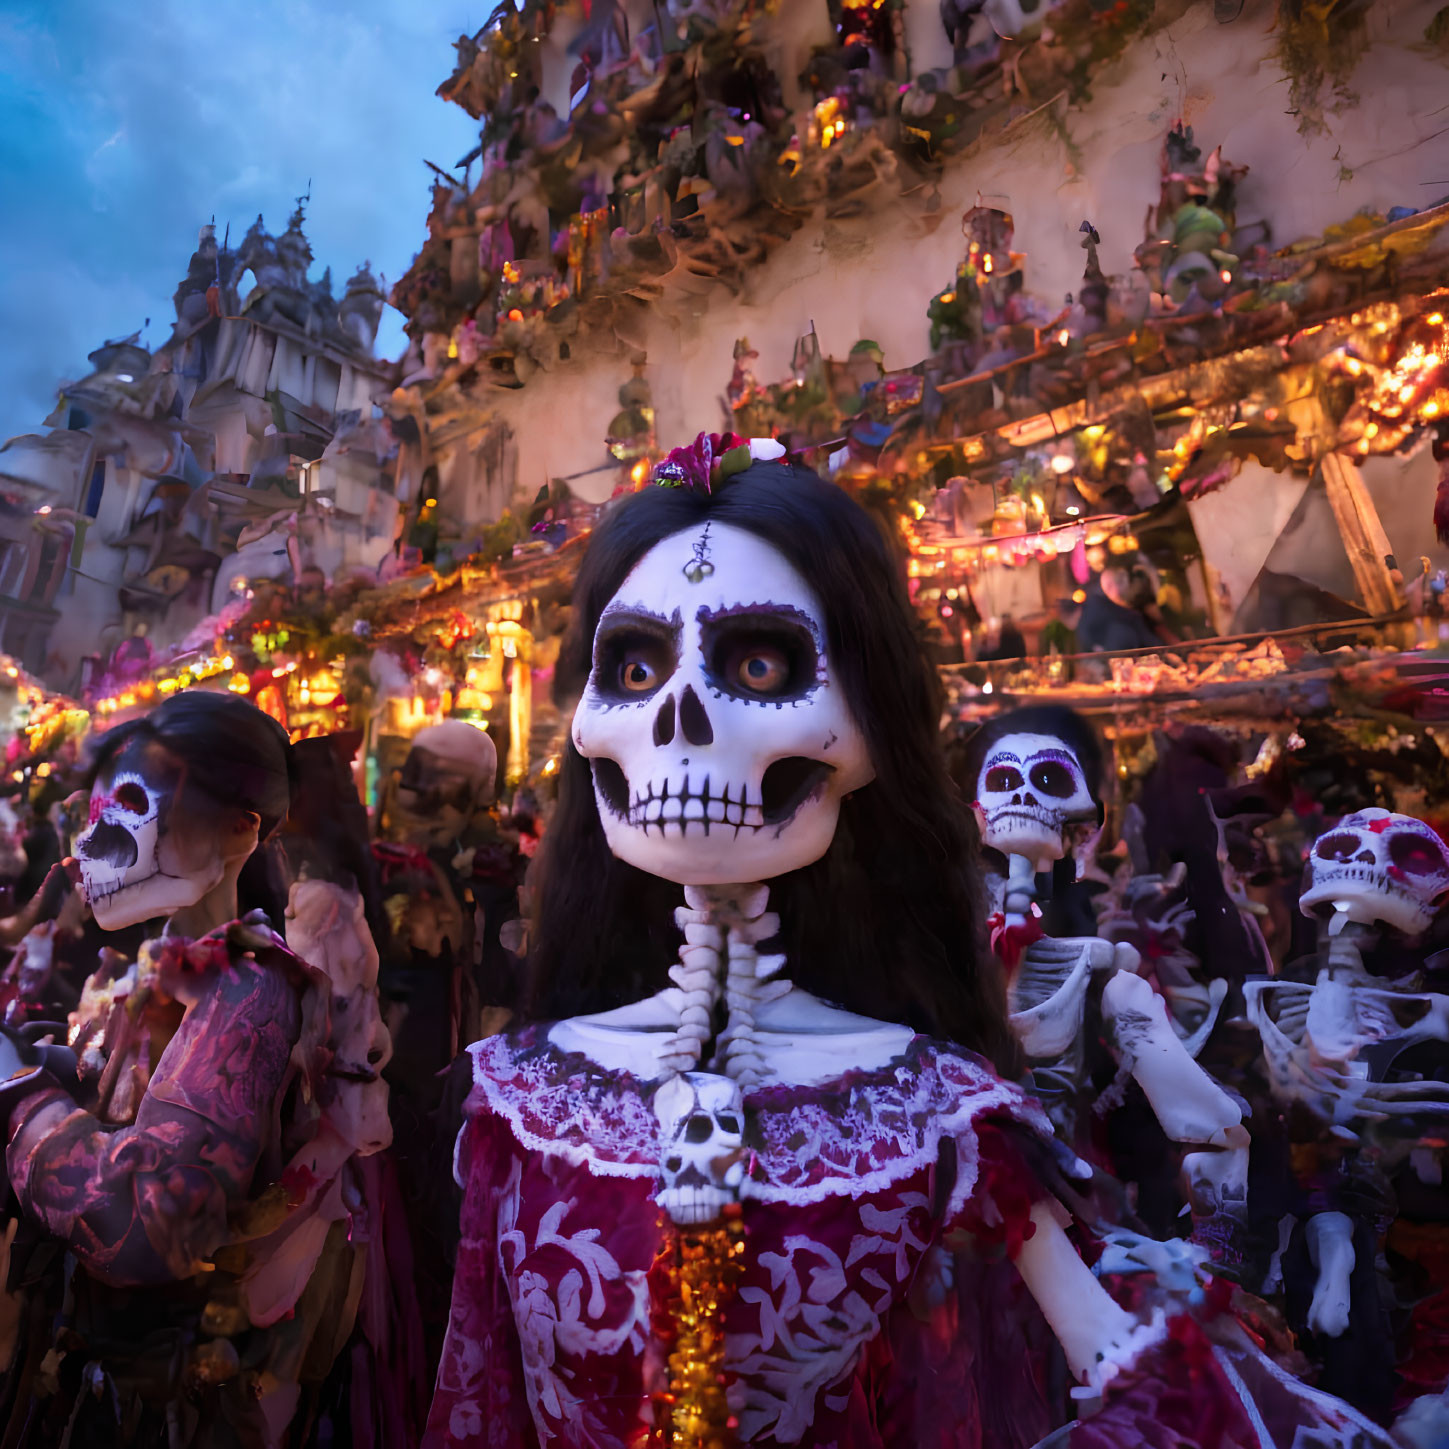 Skeleton costumes and face paint: Day of the Dead celebration with vibrant altars.